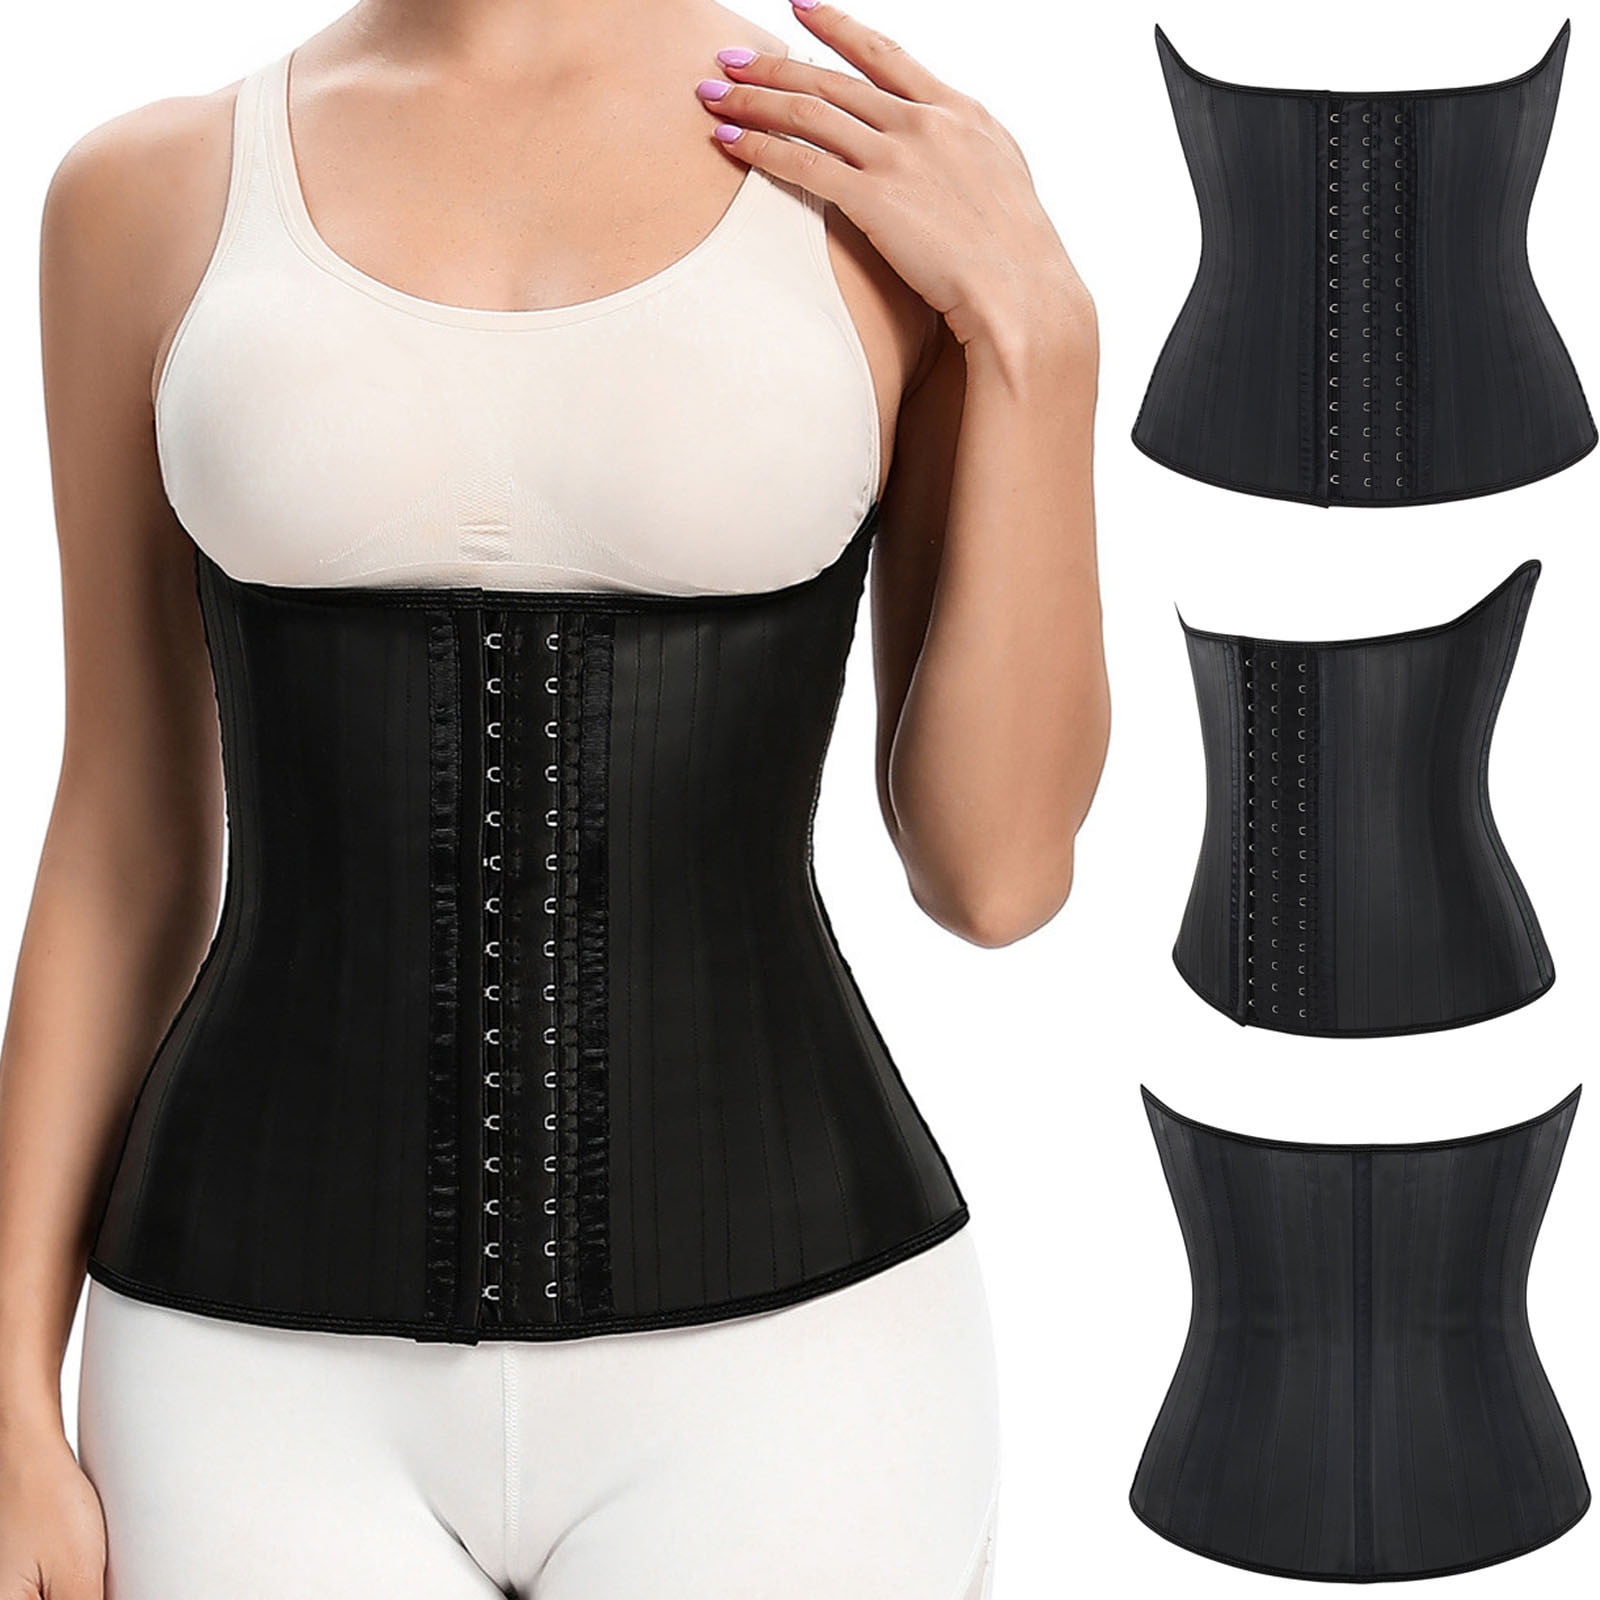 Women's Clothing Reducing And Shaping Girdles For Women Corset For Women  Waist Corset Shapewear For Sports Stomach Support - AliExpress